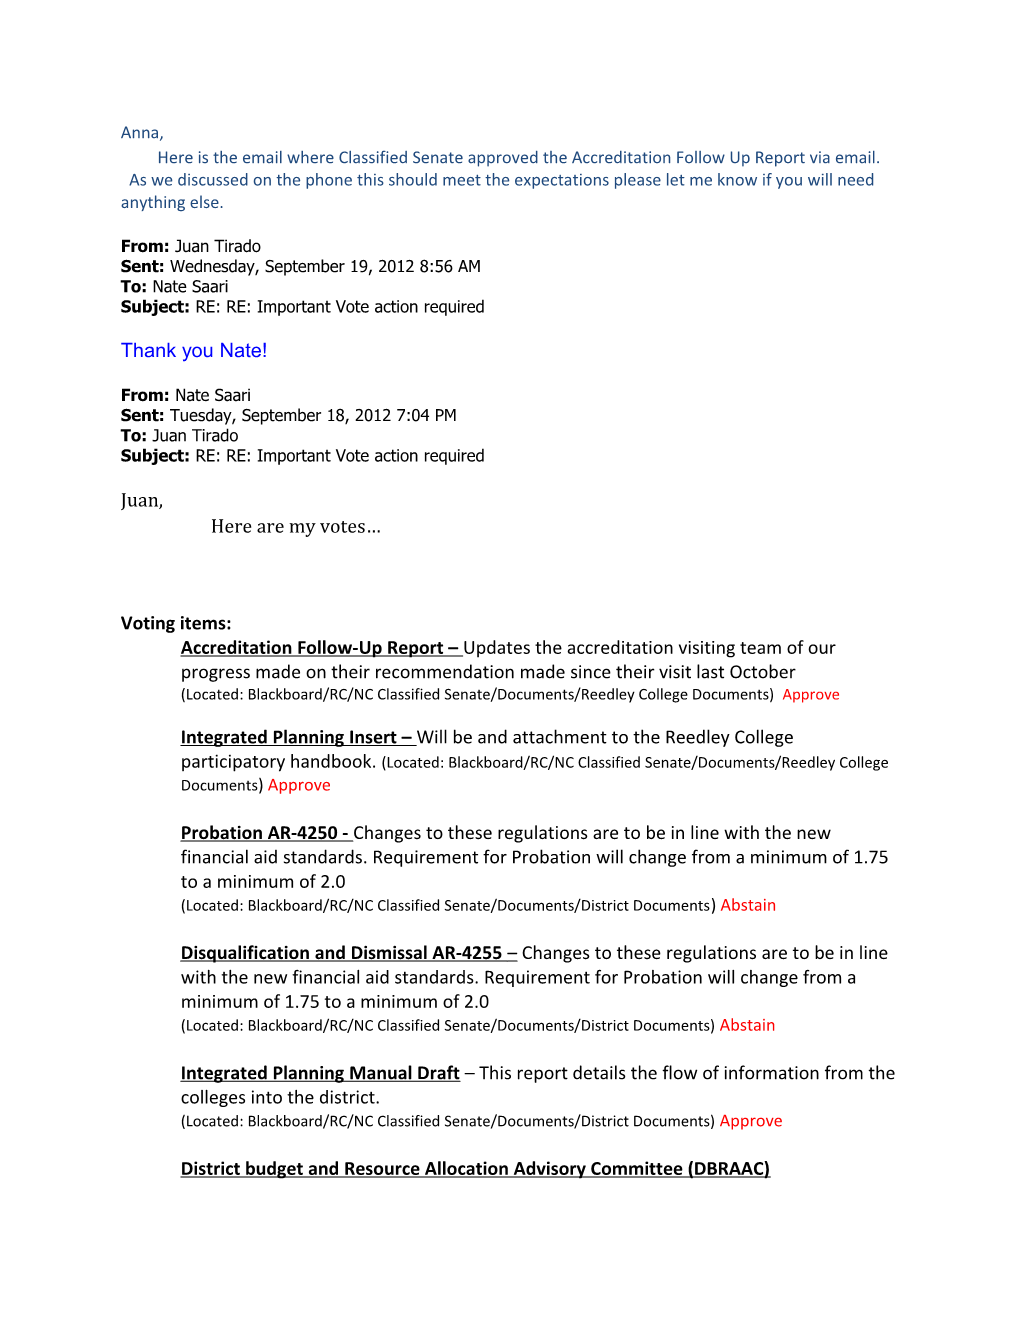 Here Is the Email Where Classified Senate Approved the Accreditation Follow up Report